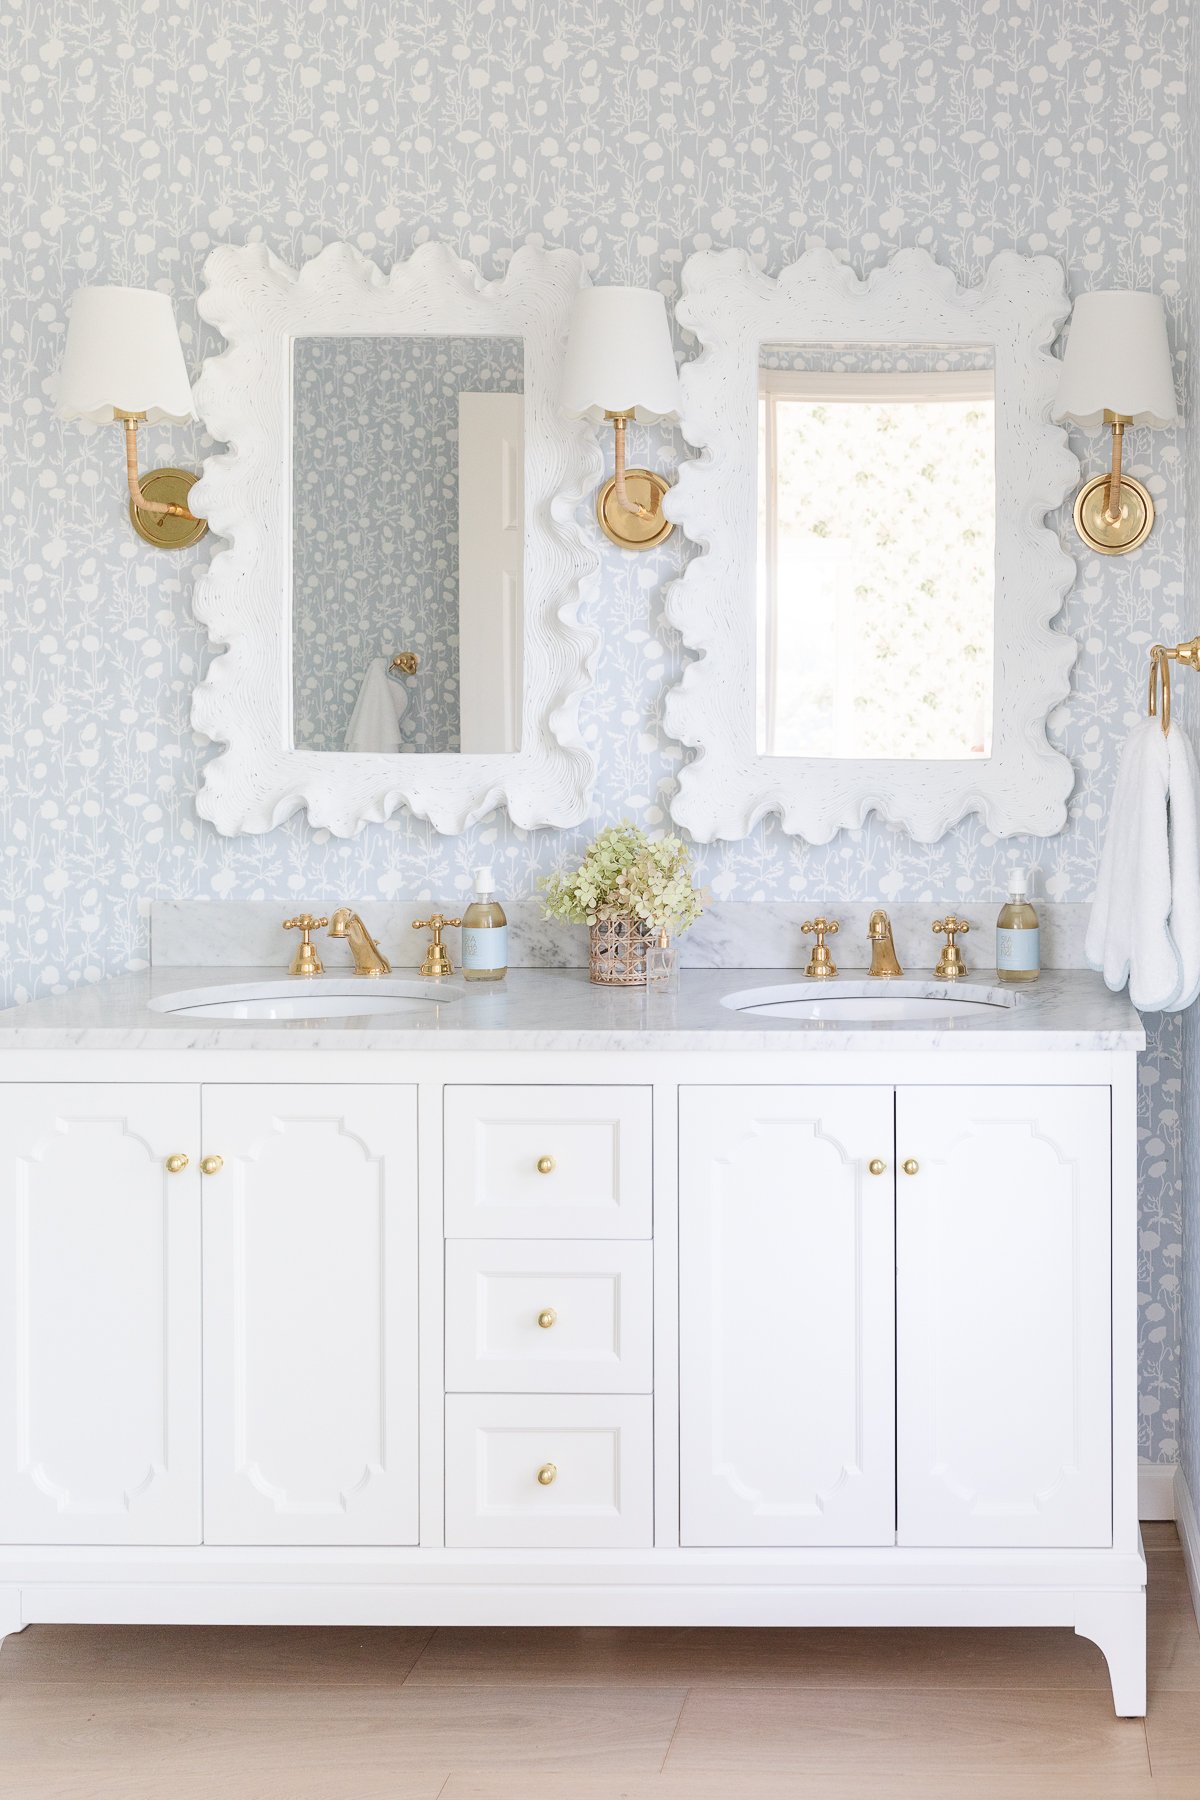 A soft blue and white wallpapered bathroom with a double white bathroom vanity.